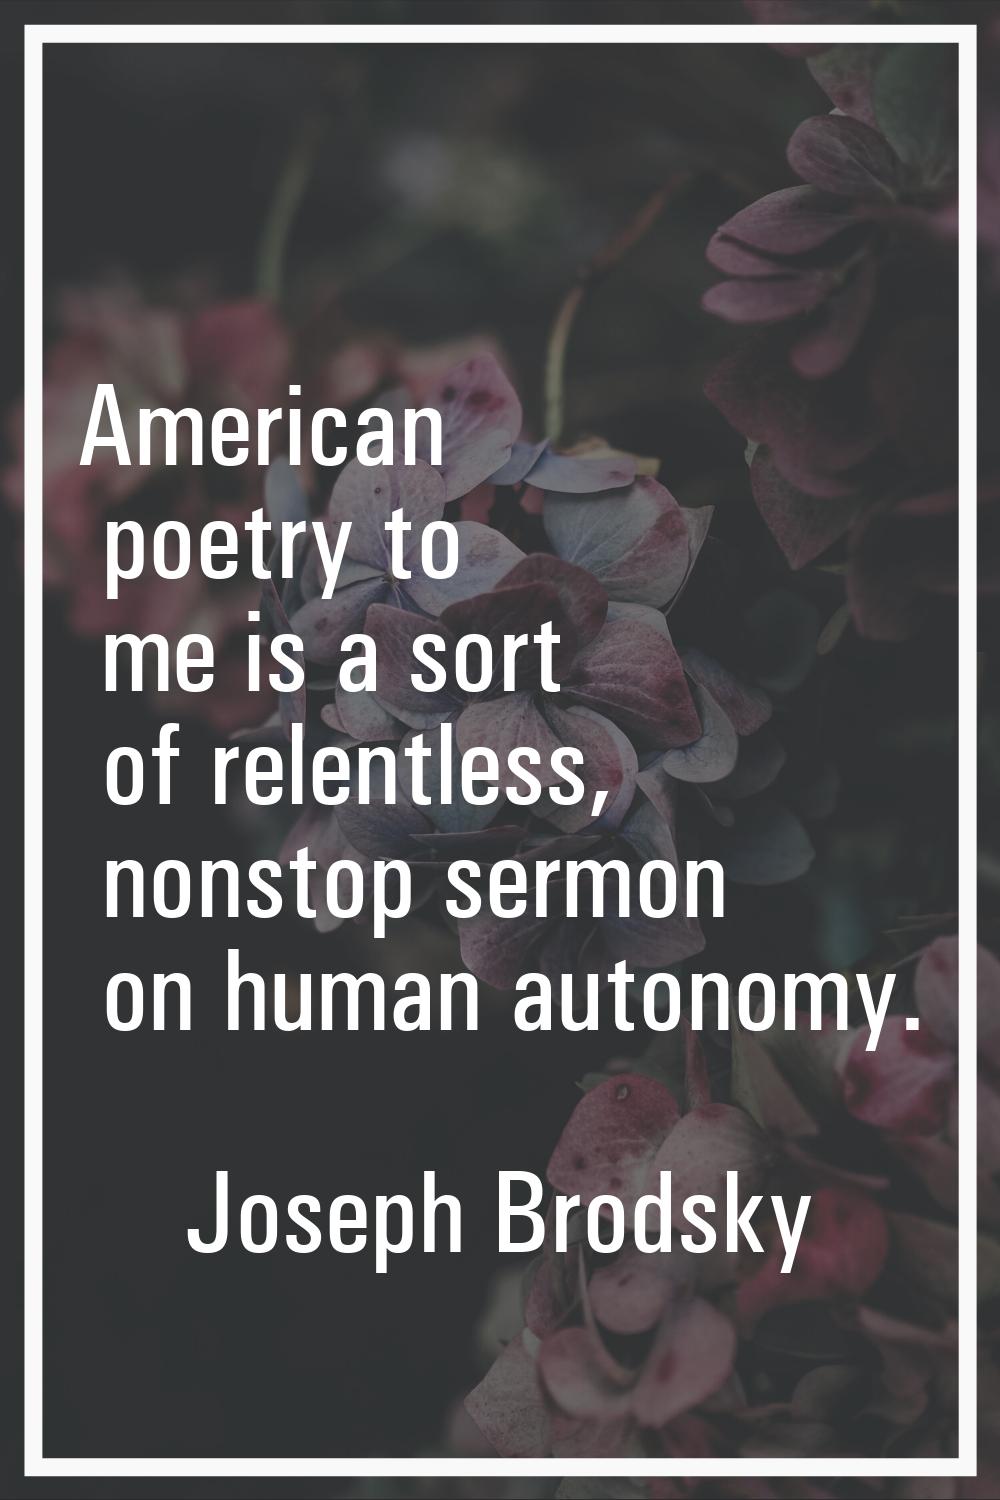 American poetry to me is a sort of relentless, nonstop sermon on human autonomy.